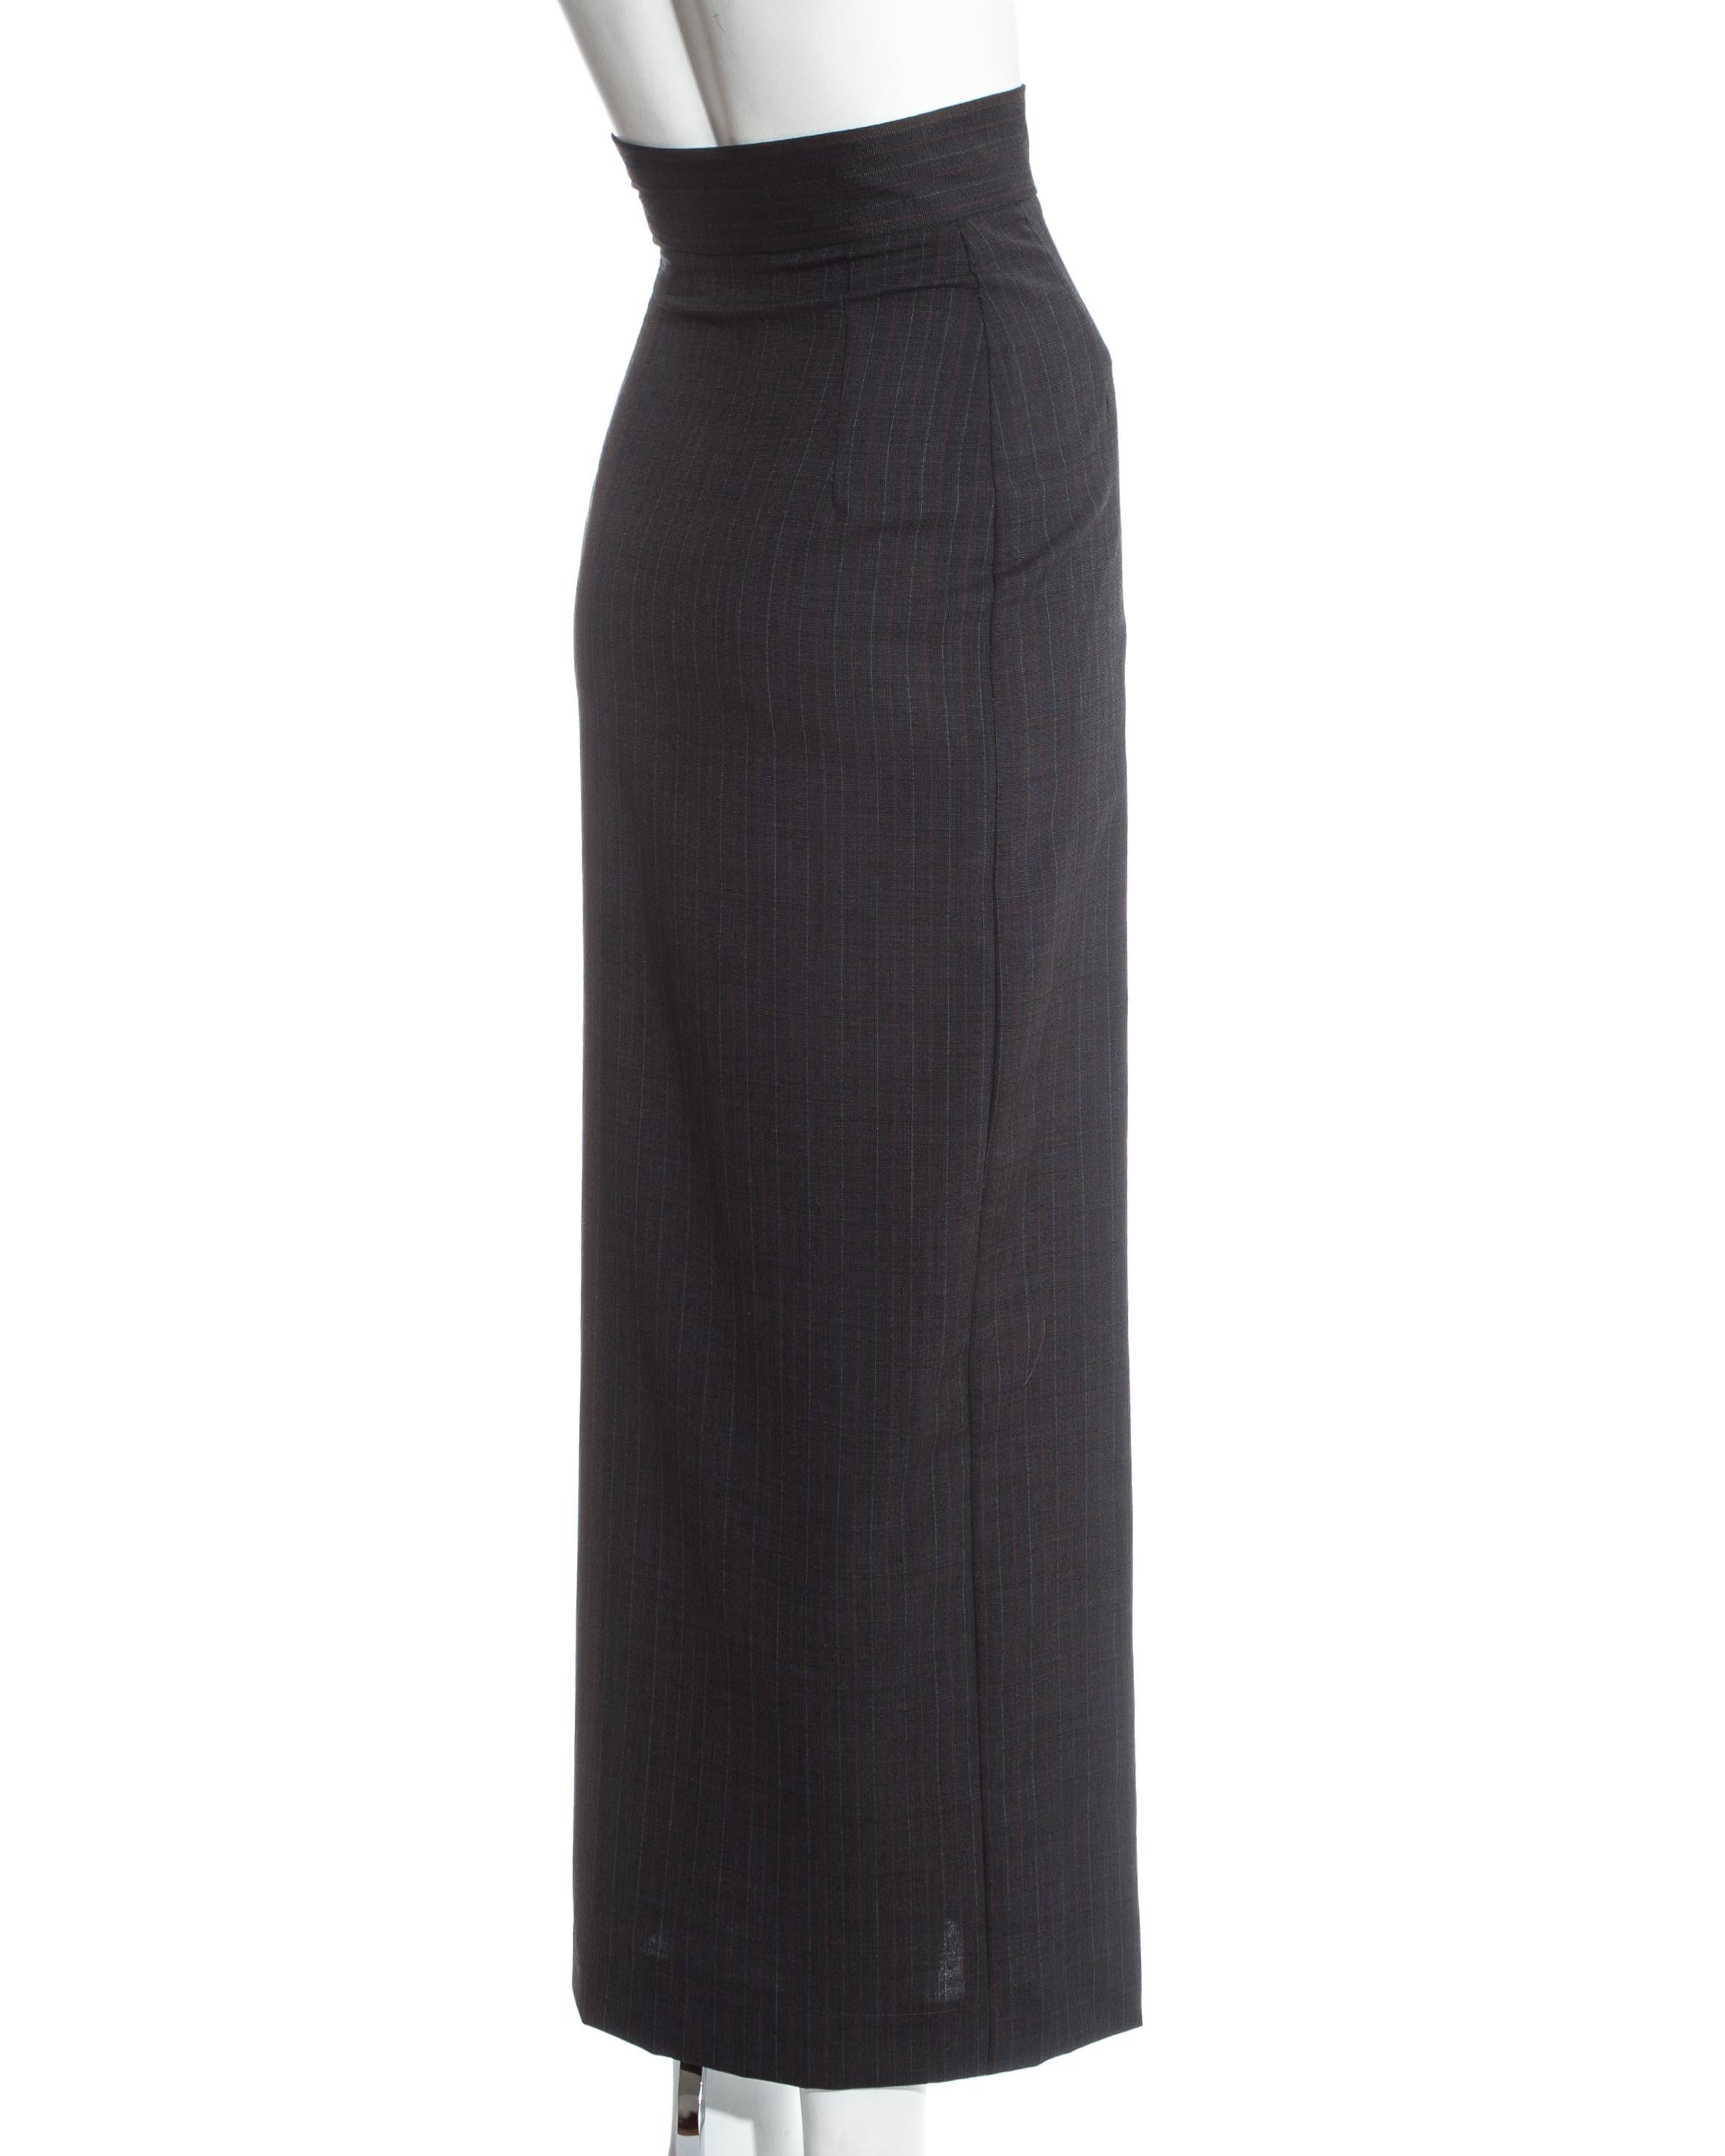 Black Vivienne Westwood grey pinstripe fitted skirt with high leg slit, ss 1989